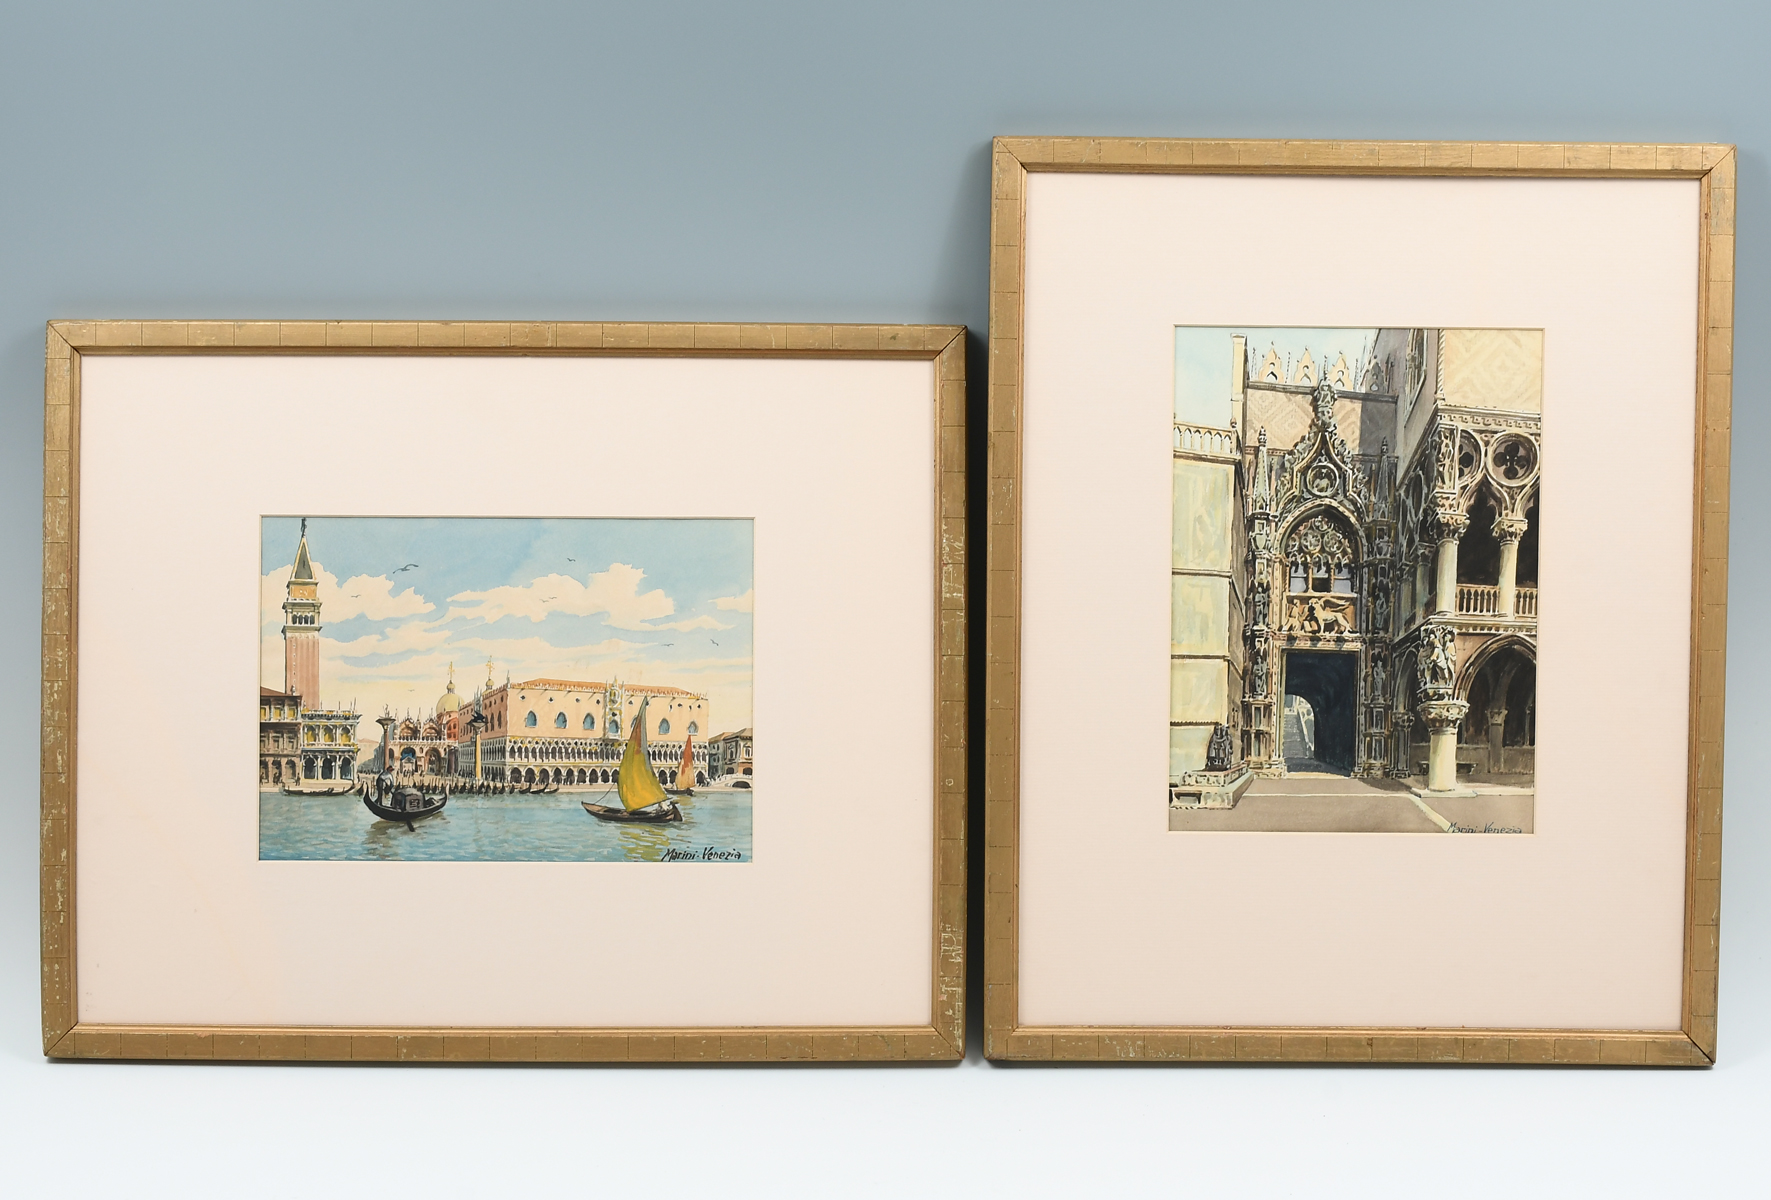 TWO VENICE PAINTINGS BY MARINI: